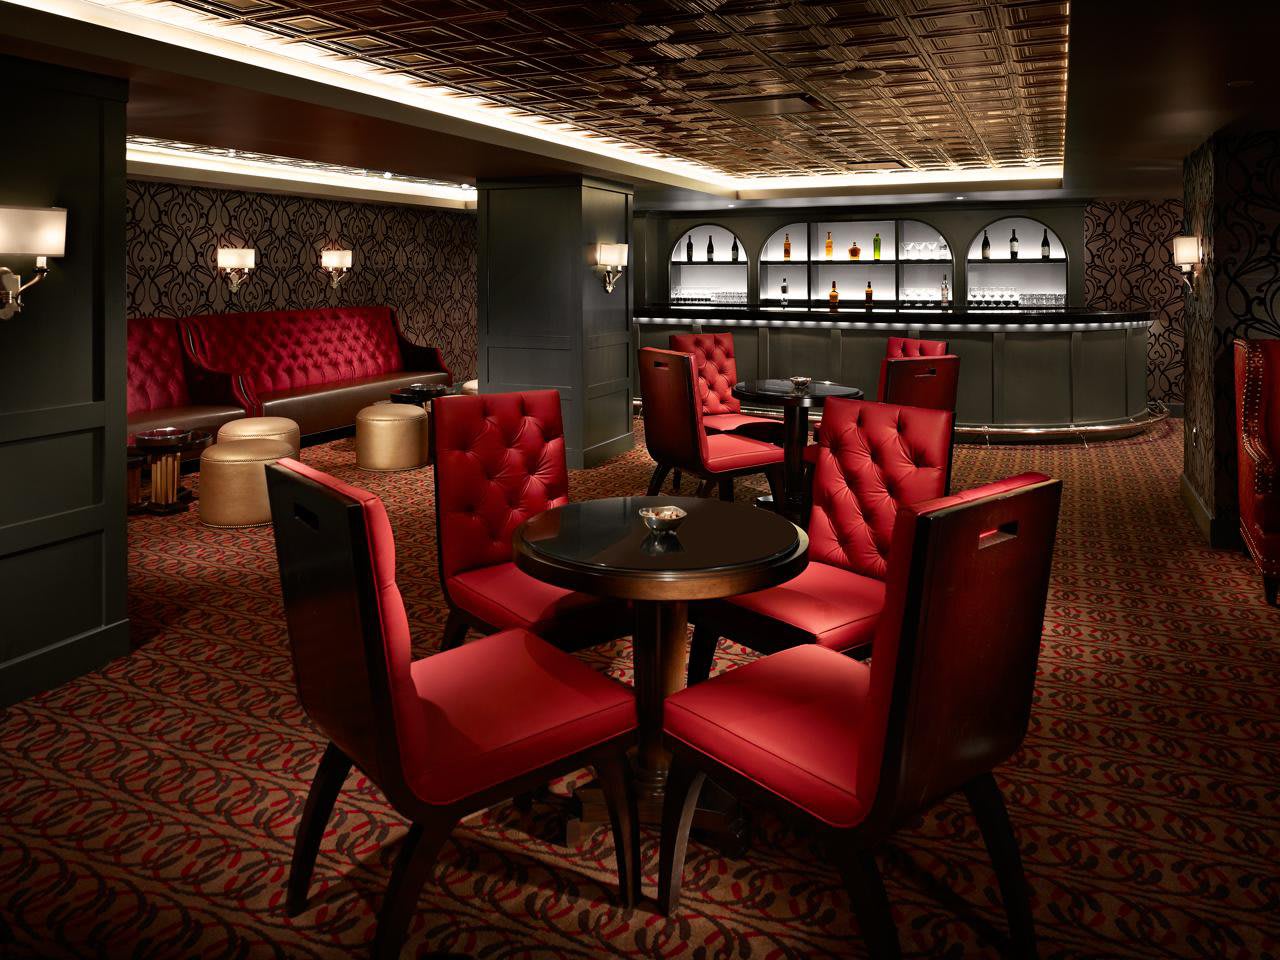 Eight Modern Speakeasies With Real Roots in the 1920s